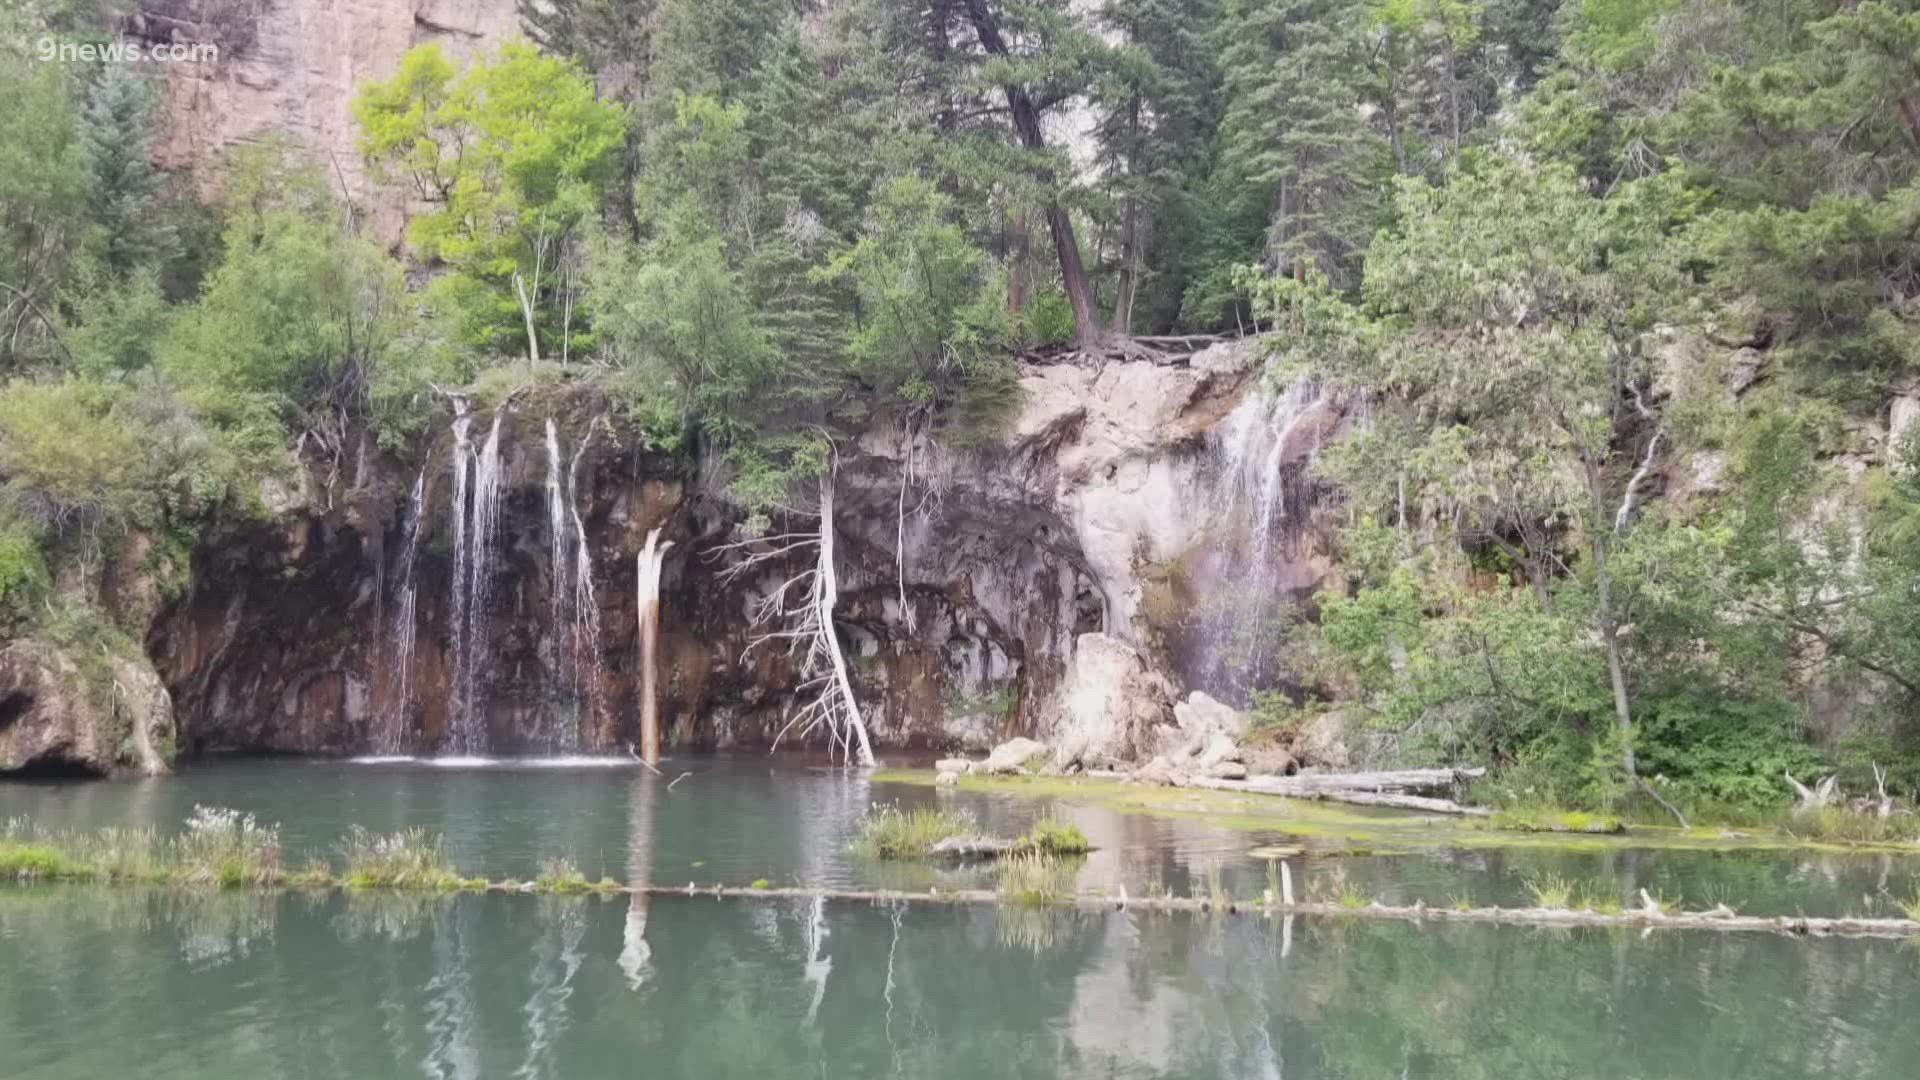 Officials announced that while Hanging Lake was spared from the mudslides, the trail will need to be reconstructed.